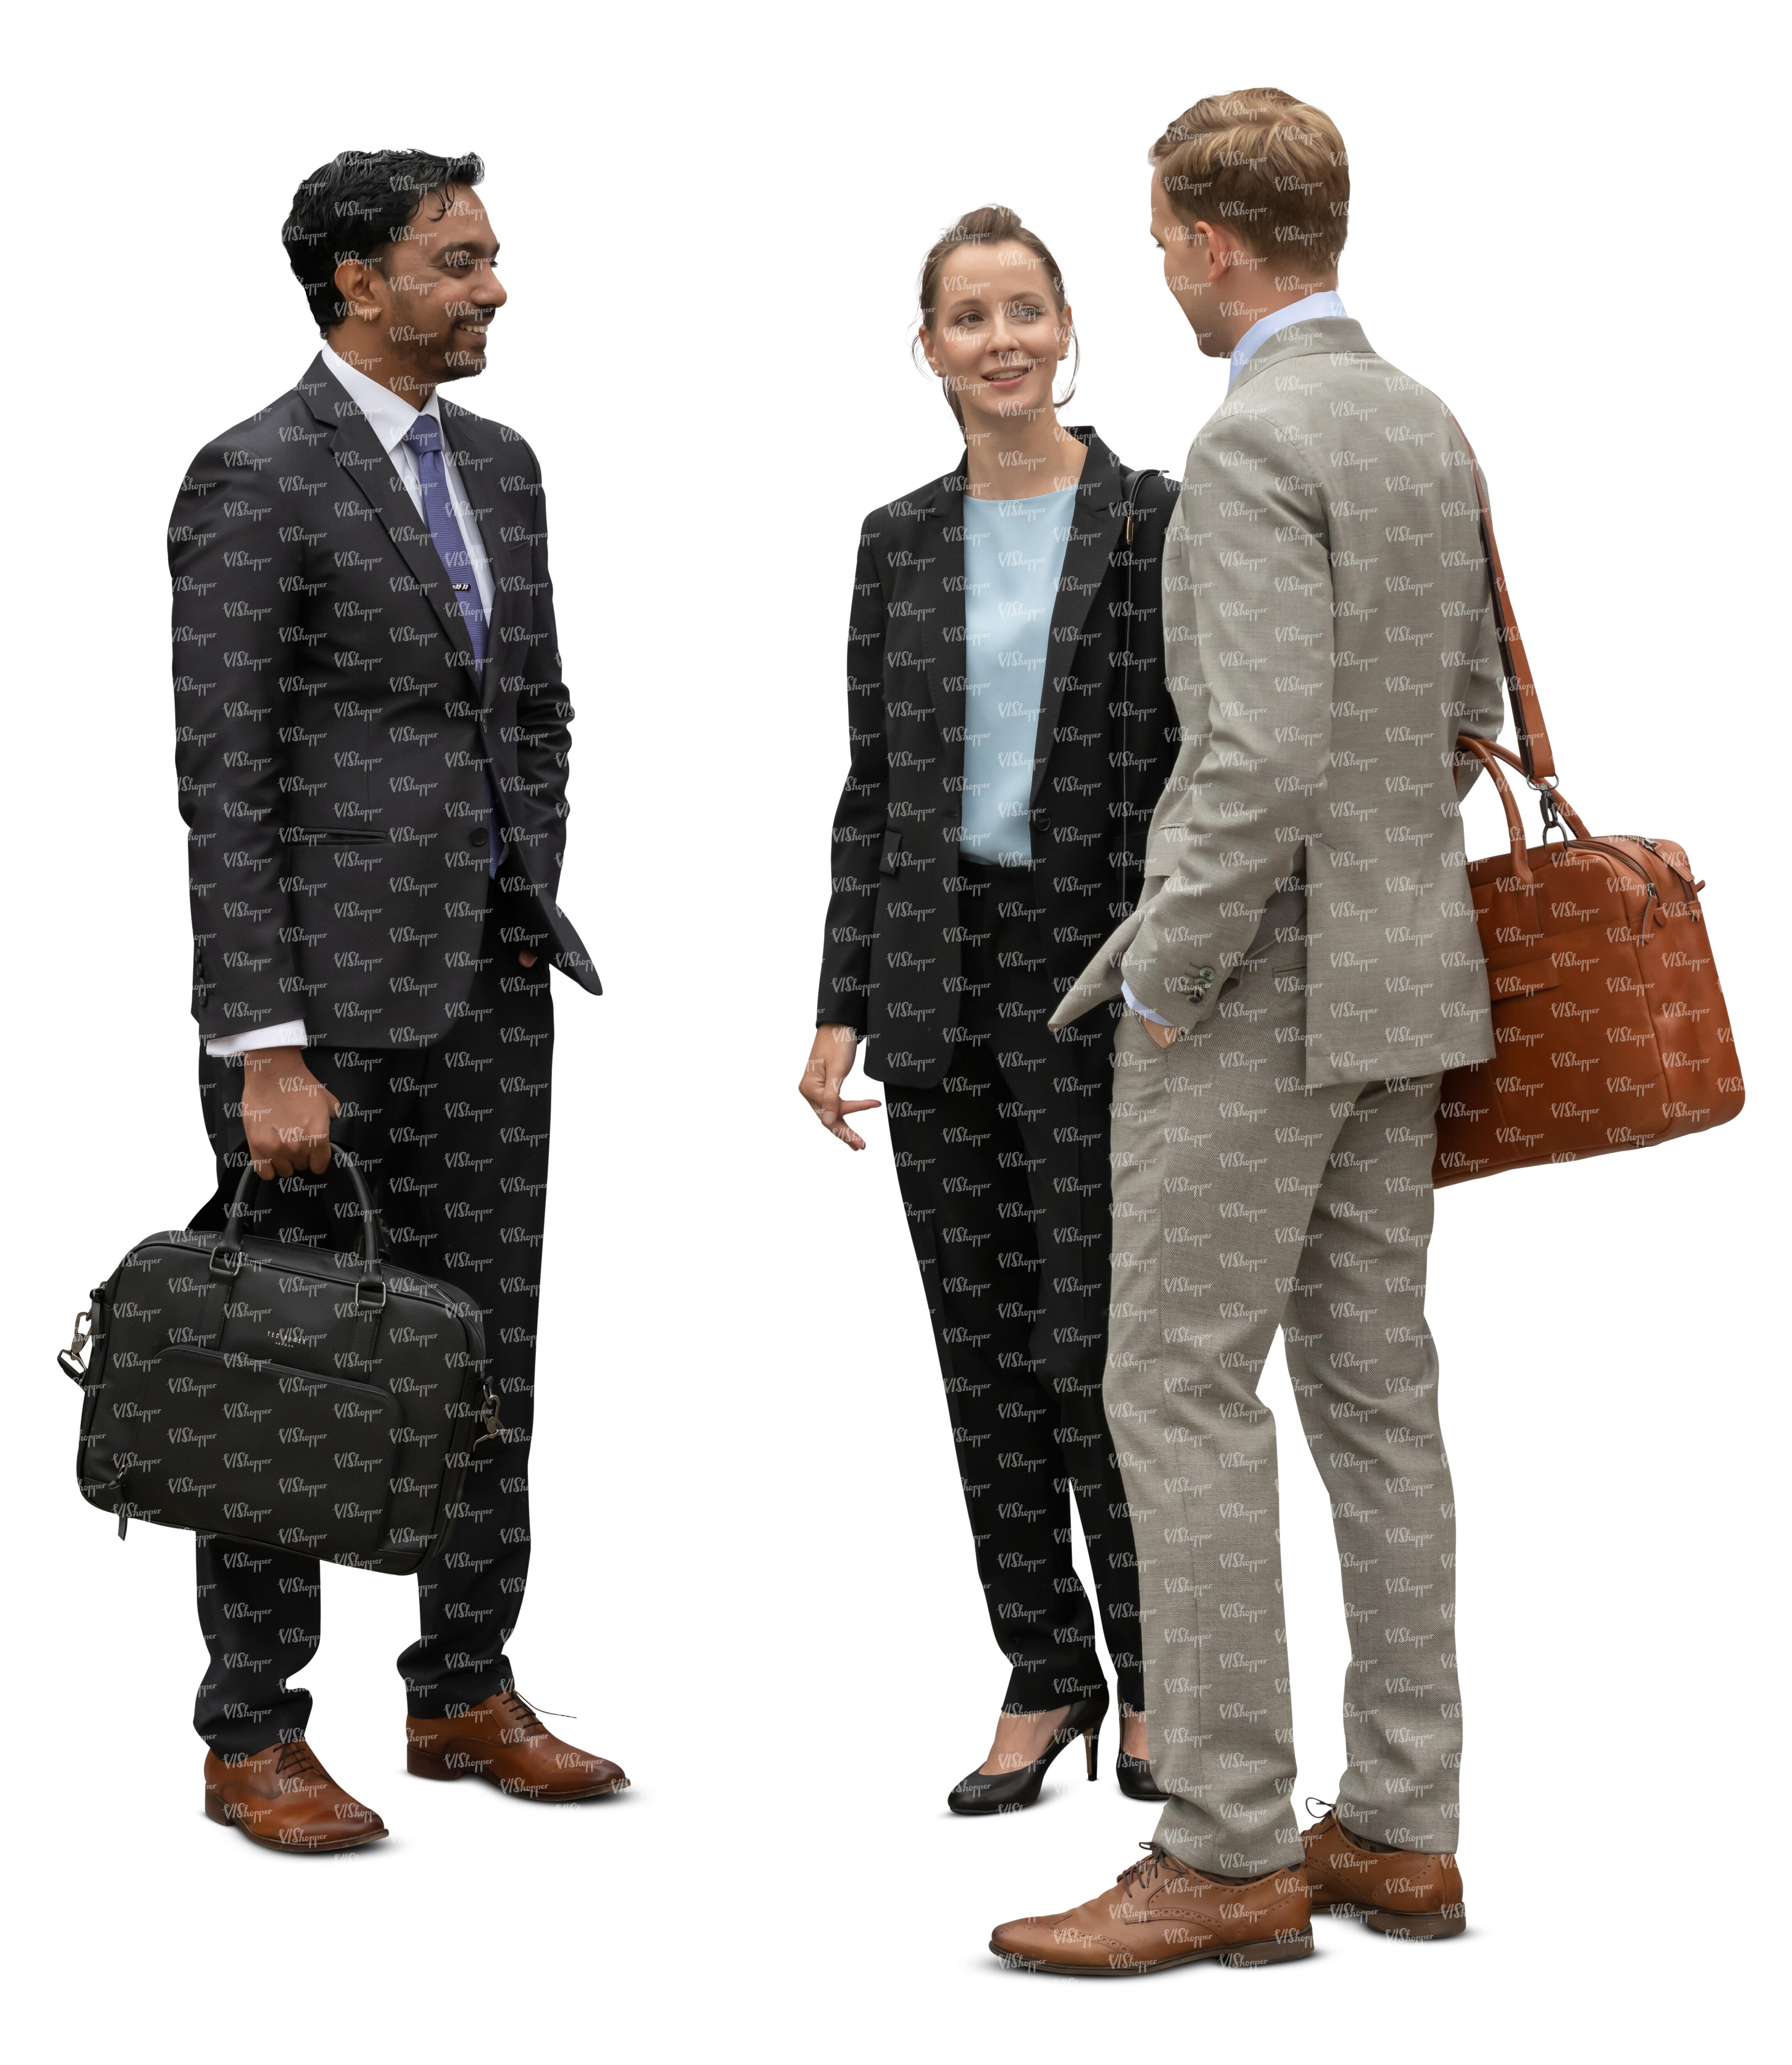 Cut Out Group Of Three Businesspeople Standing And Talking Vishopper